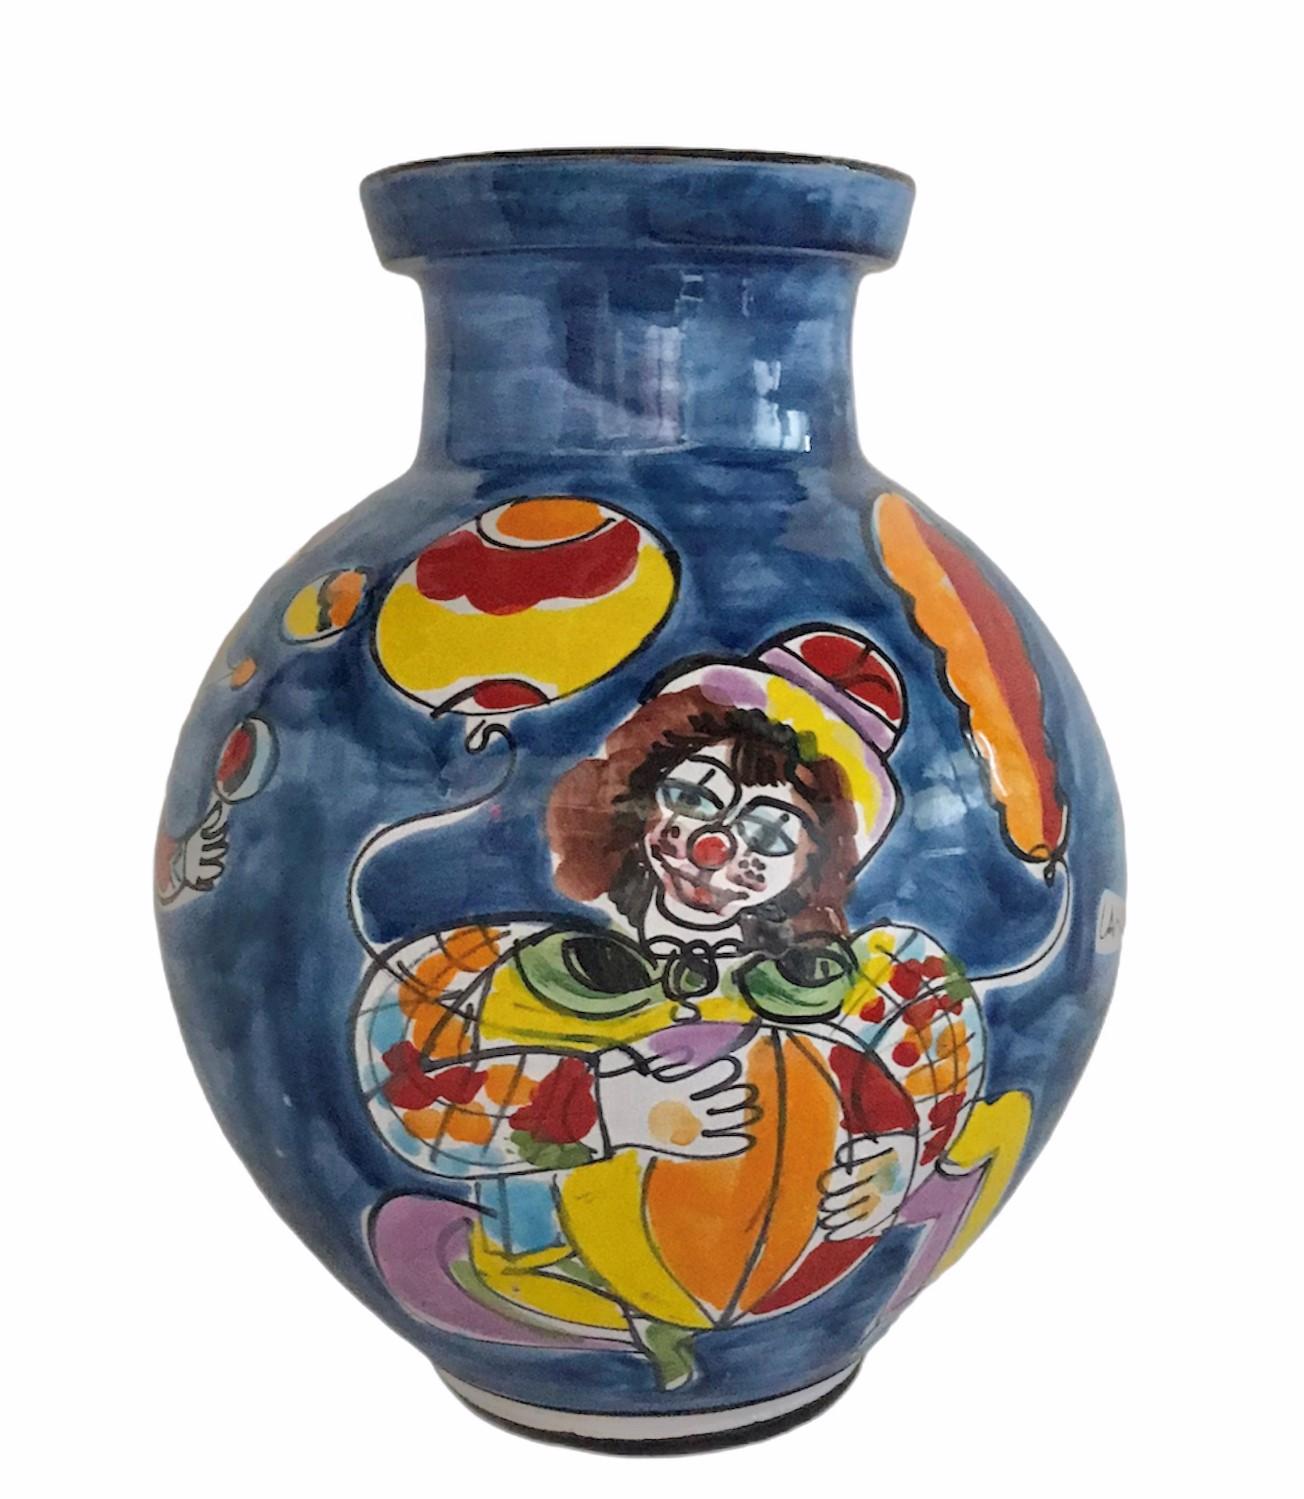 REDUCED FROM $595....La Musa large bulbous ceramic floor vase 1970s Italian Modern, Carnevale, produced for Saks Fifth Avenue. The colorful design is of Circus or Carnival characters - clown, juggler, musician and acrobats. Saks Fifth Ave foil label